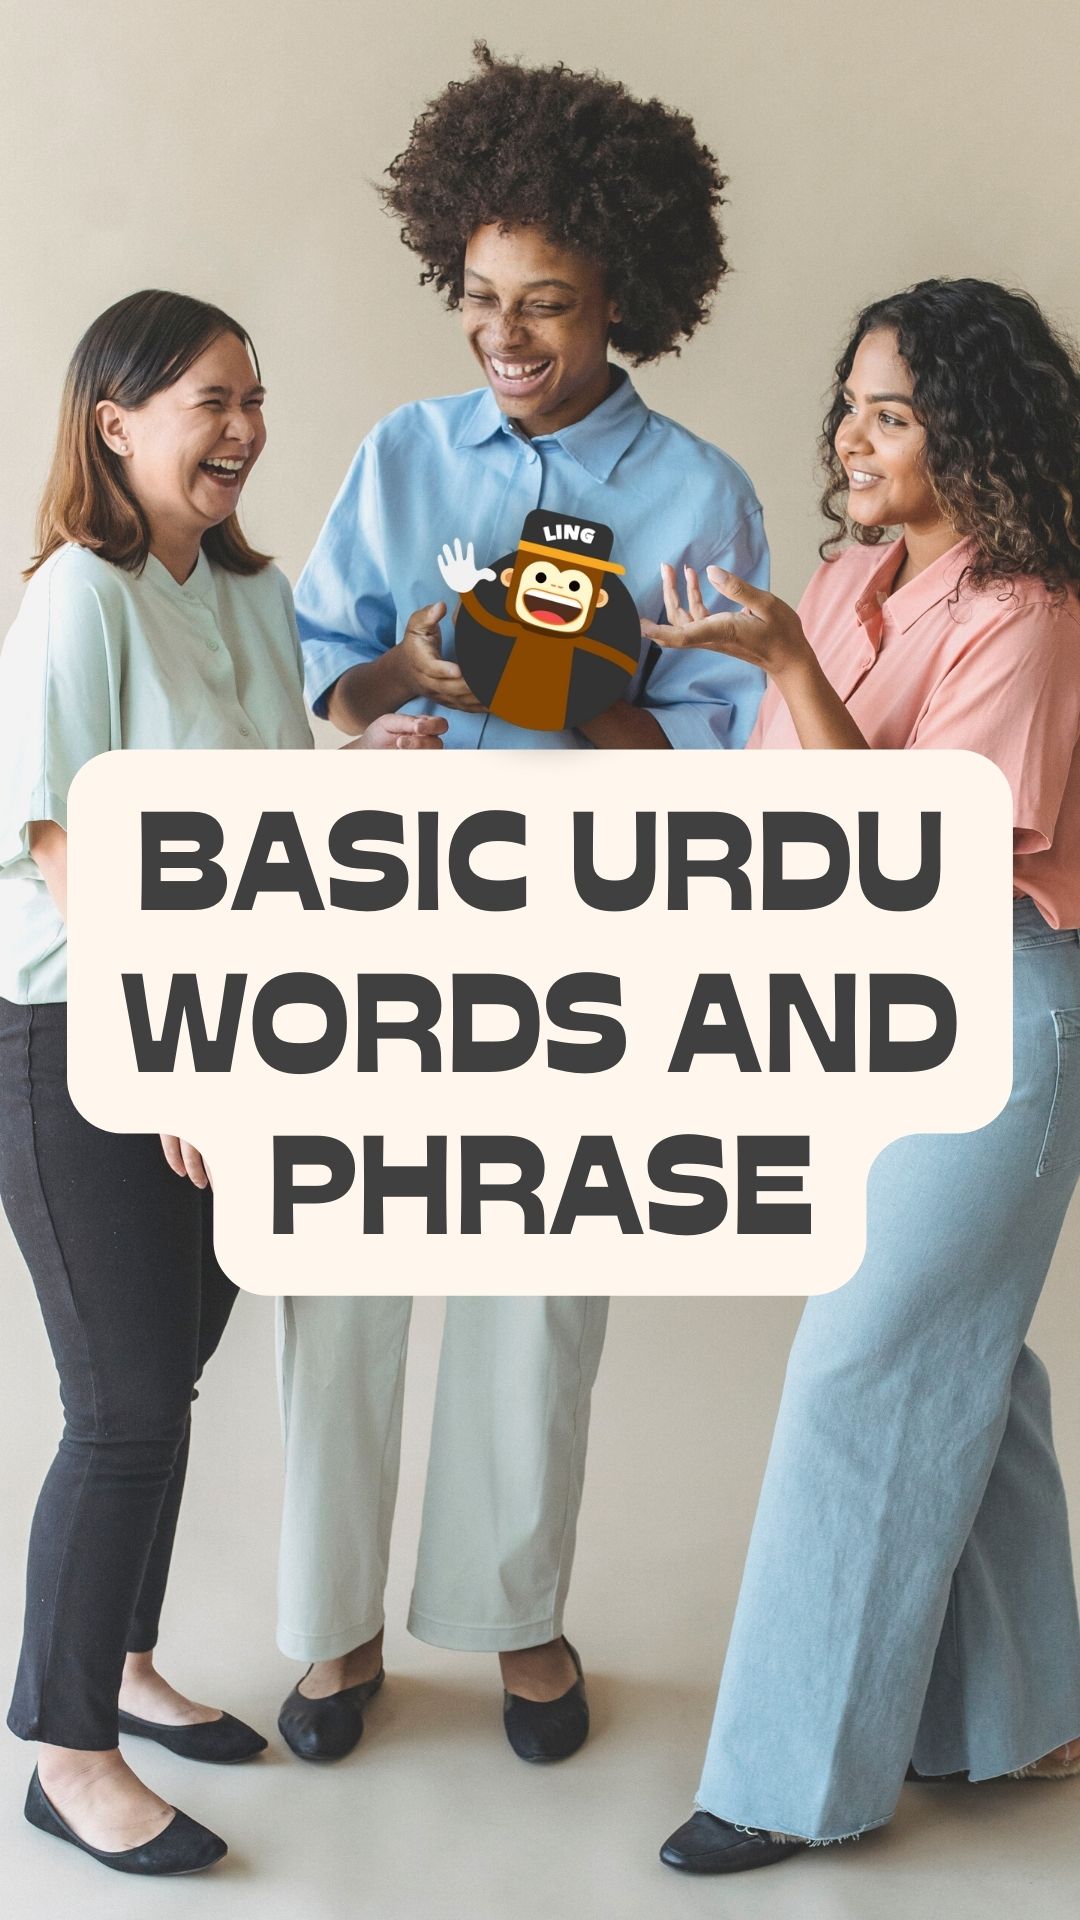 Basic Urdu Words And Phrases